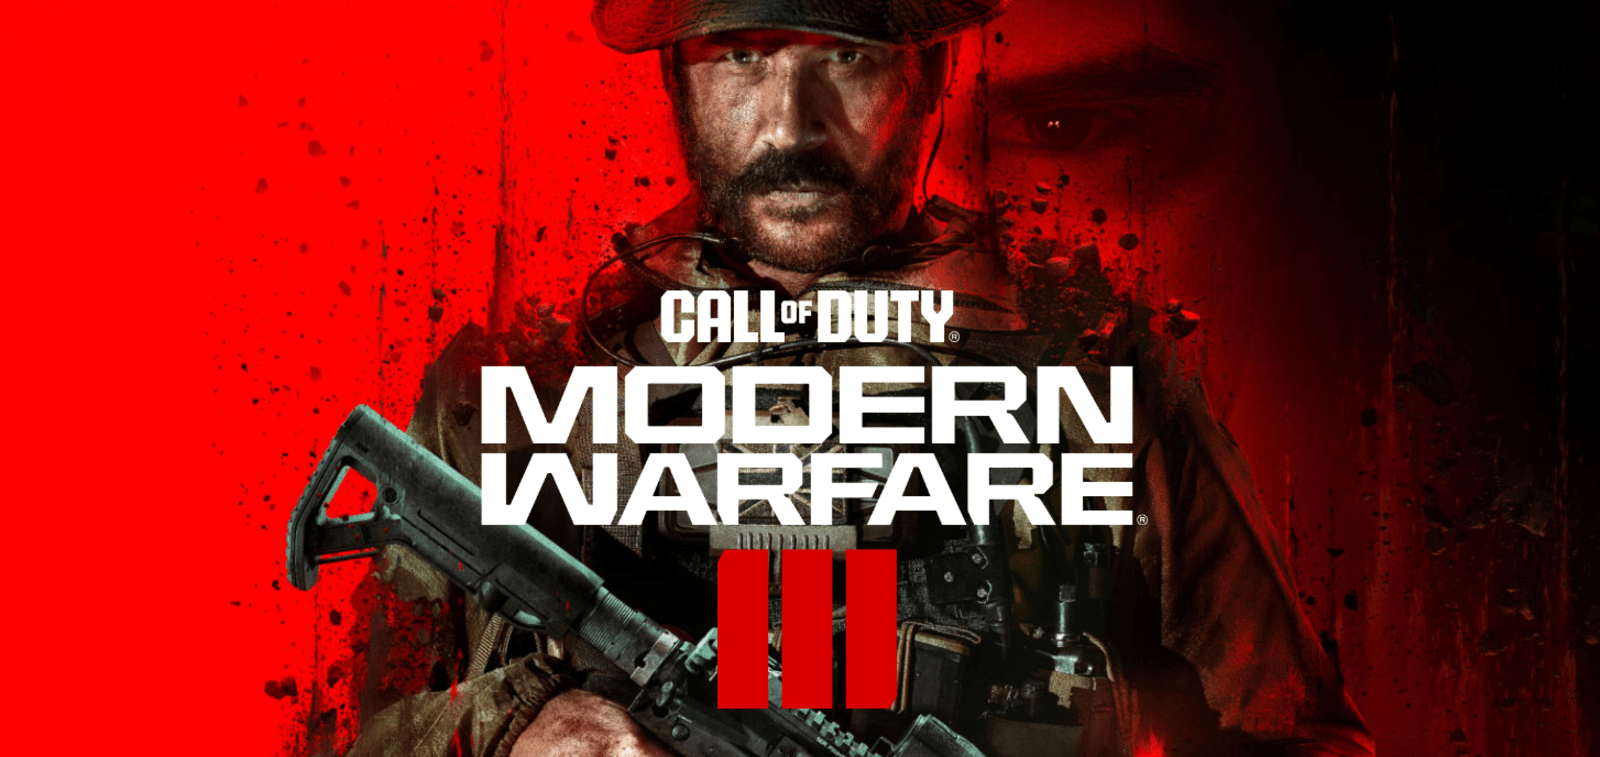 COD Modern Warfare 3 campaign turns out to be a massive let down